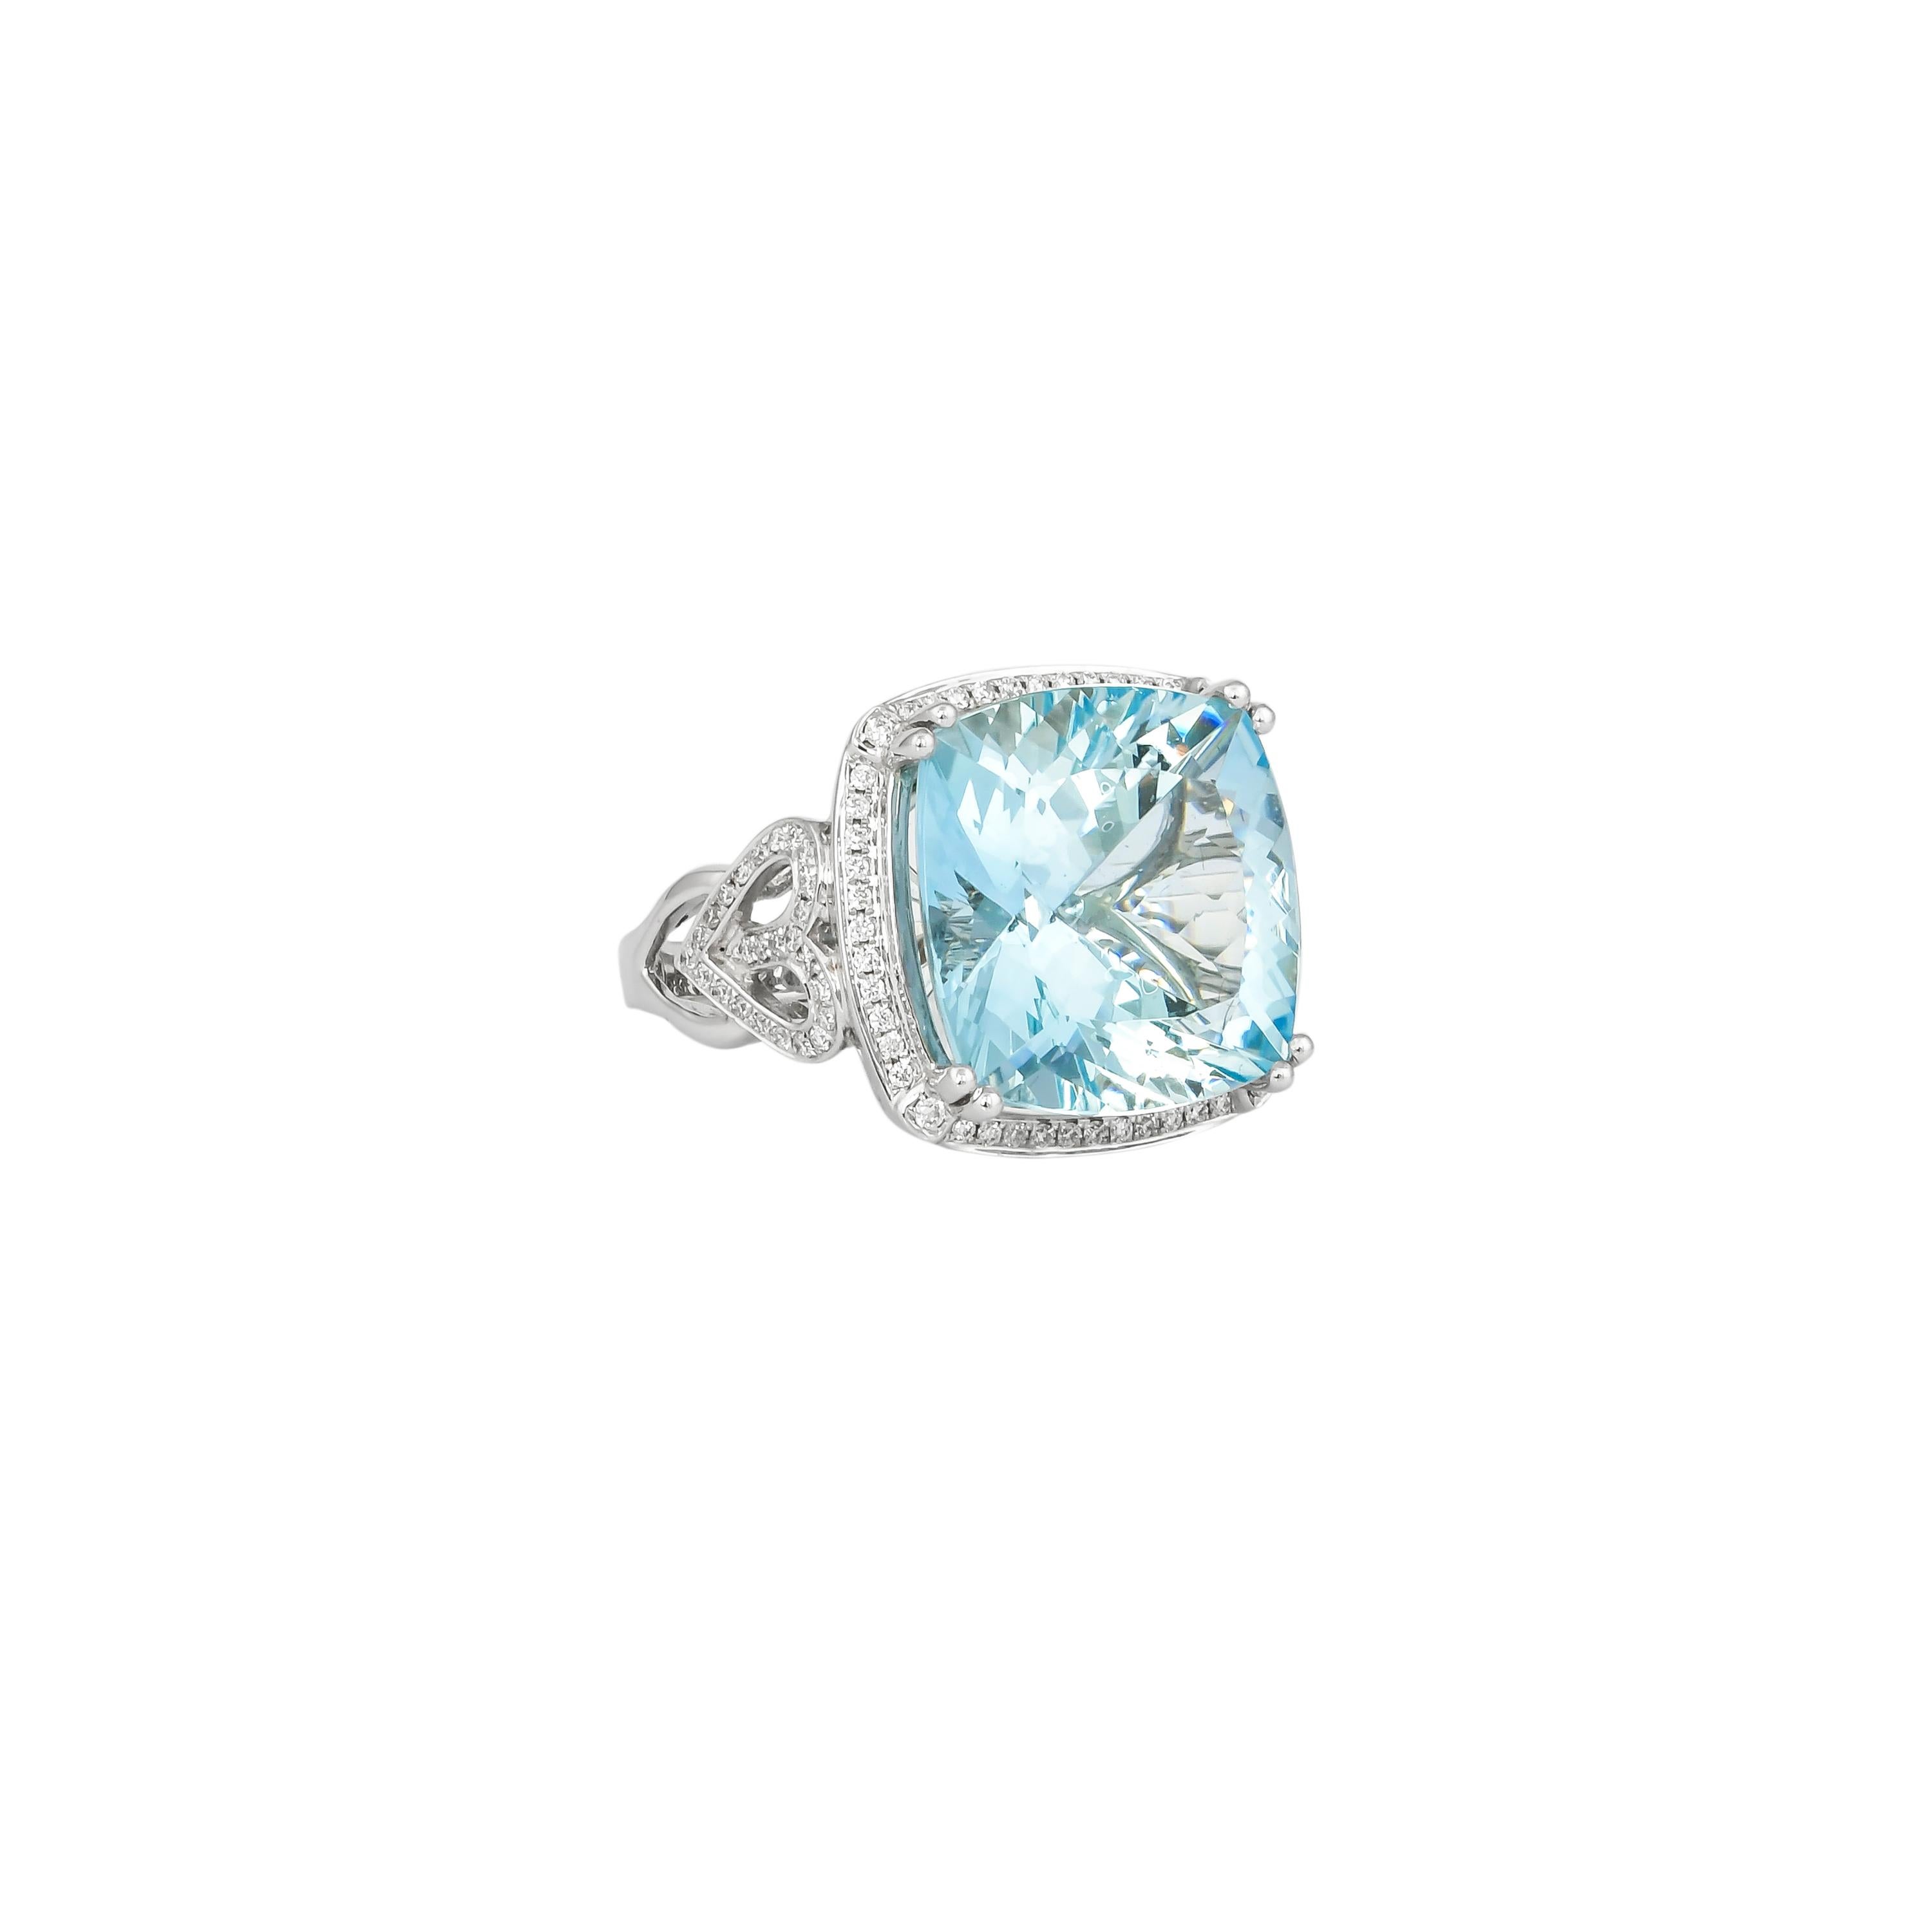 This collection features an array of aquamarines with an icy blue hue that is as cool as it gets! Accented with diamonds these rings are made in white gold and present a classic yet elegant look. 

Classic aquamarine ring in 14K white gold with